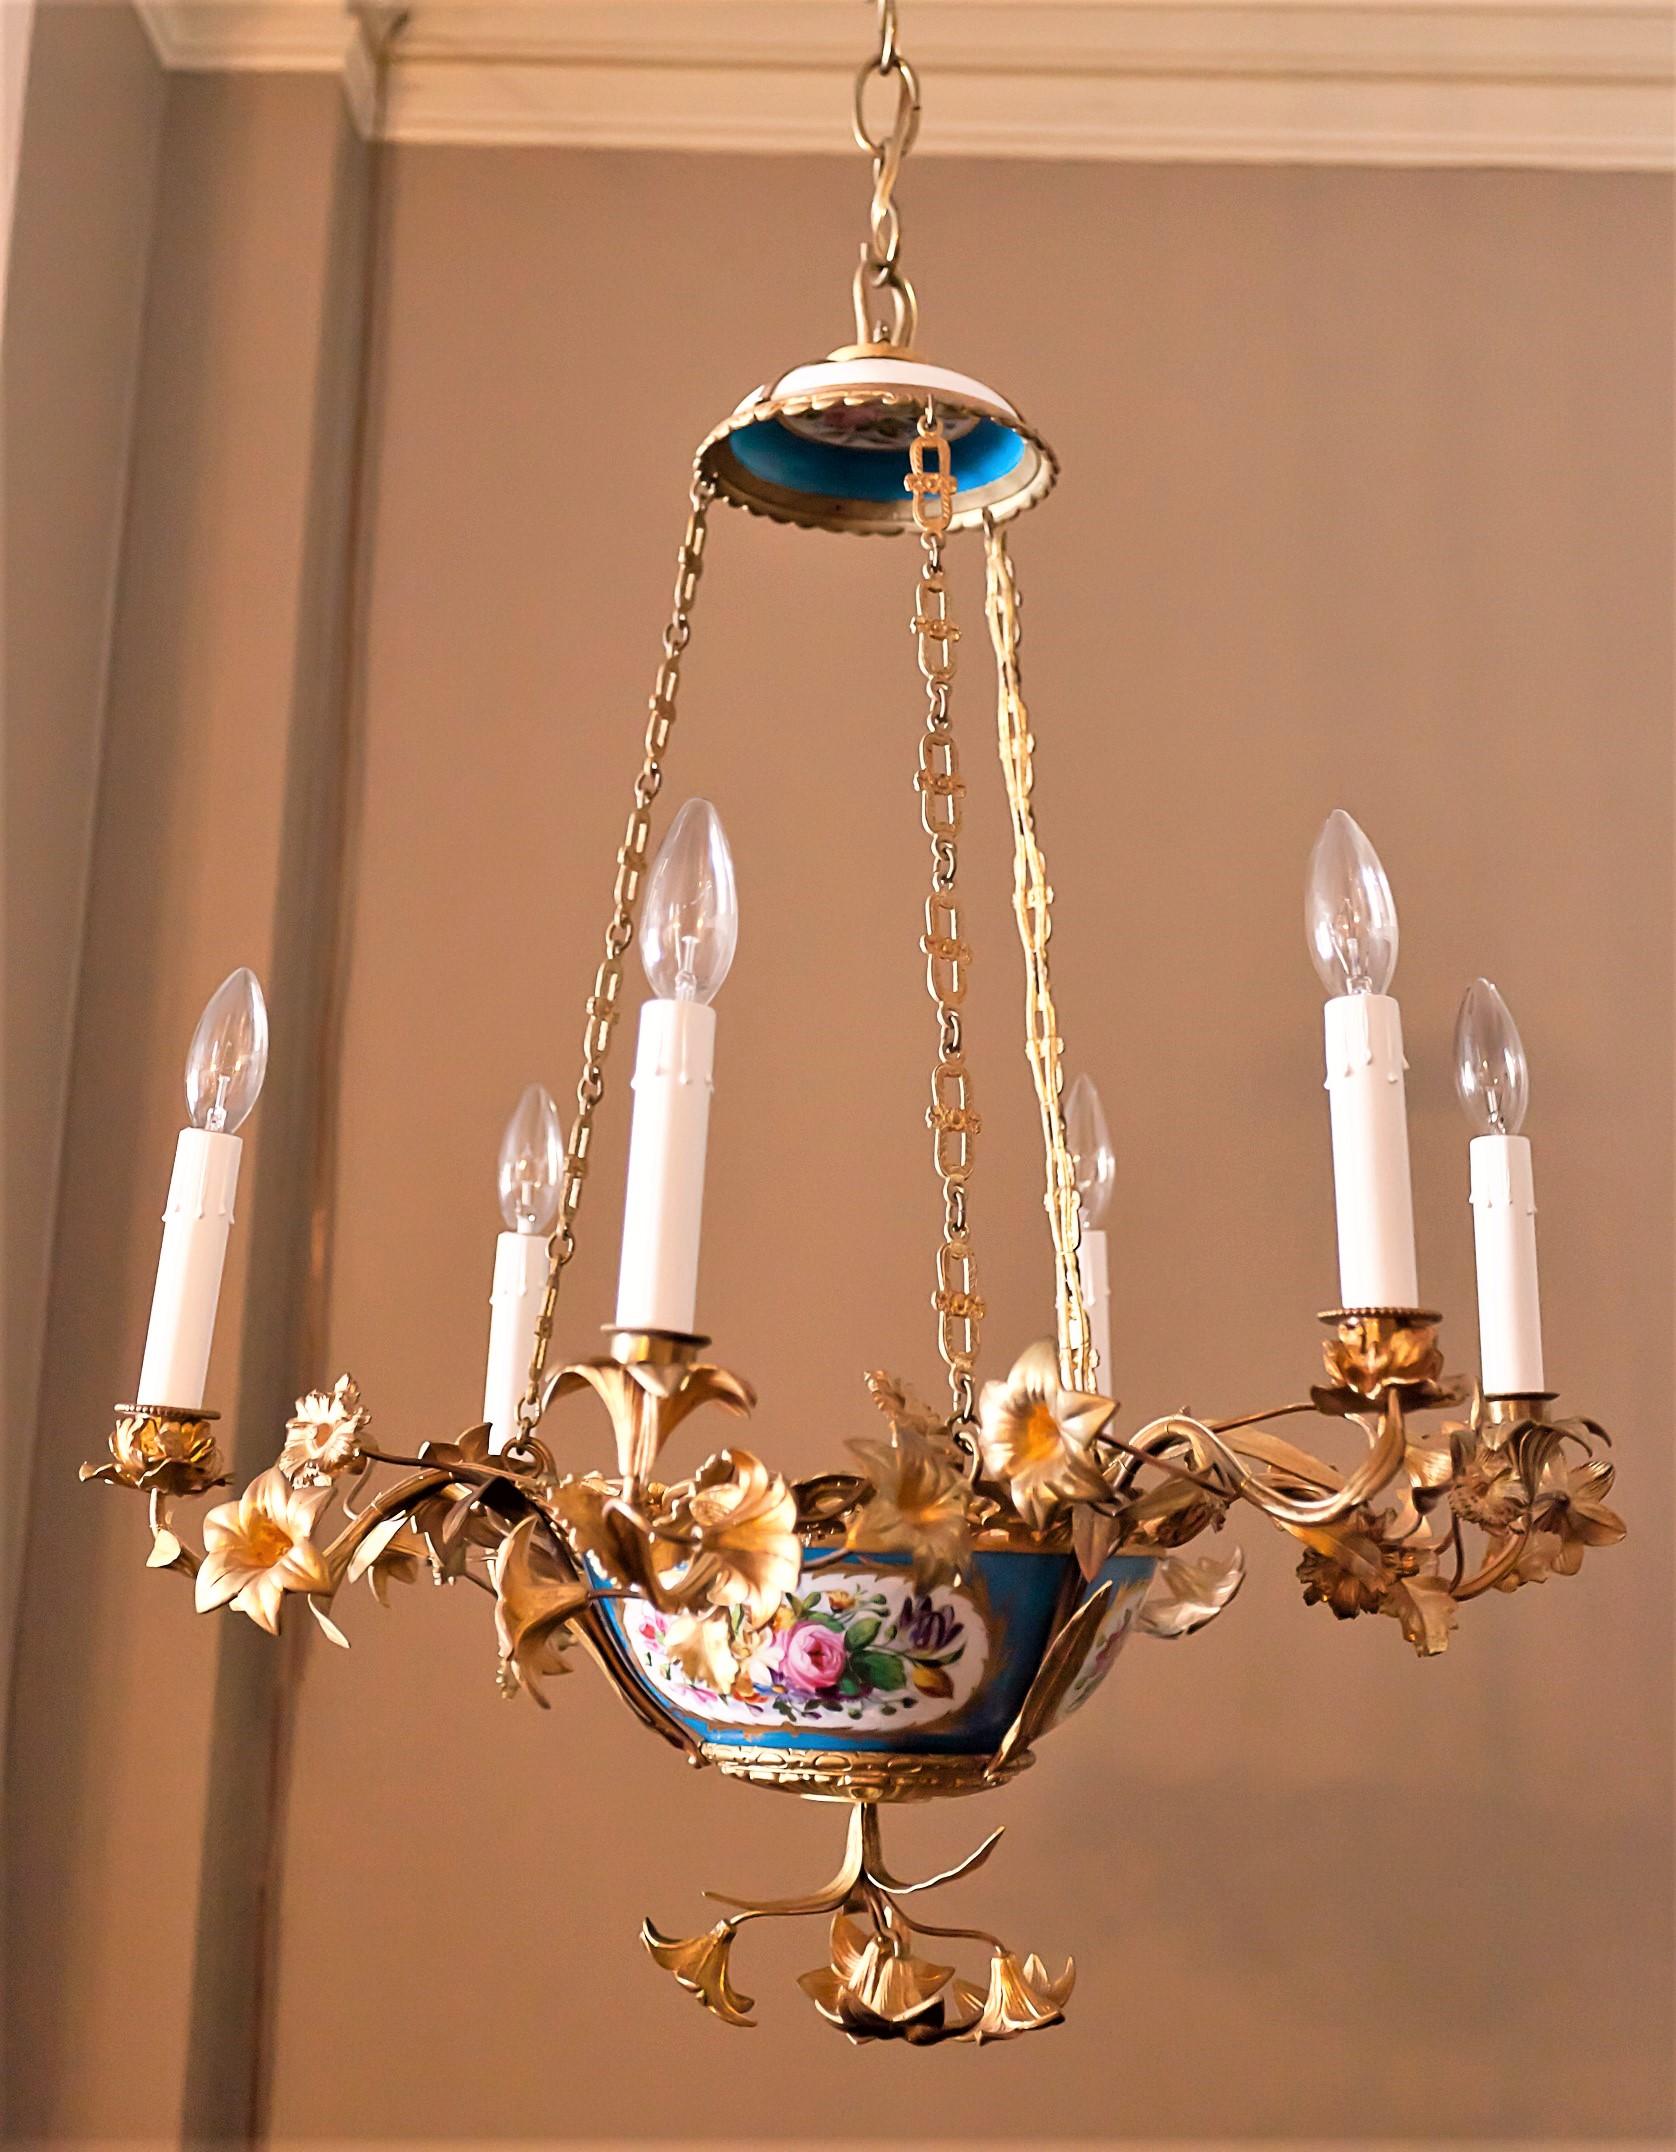 Continental foliate and floral six light fixture with hand-painted porcelain and hand-forged and gilt bronze arms, mounts and chain. Rococo style is copied from mid 18th century France. Ceiling cap, hanging hardware and one foot of chain included.